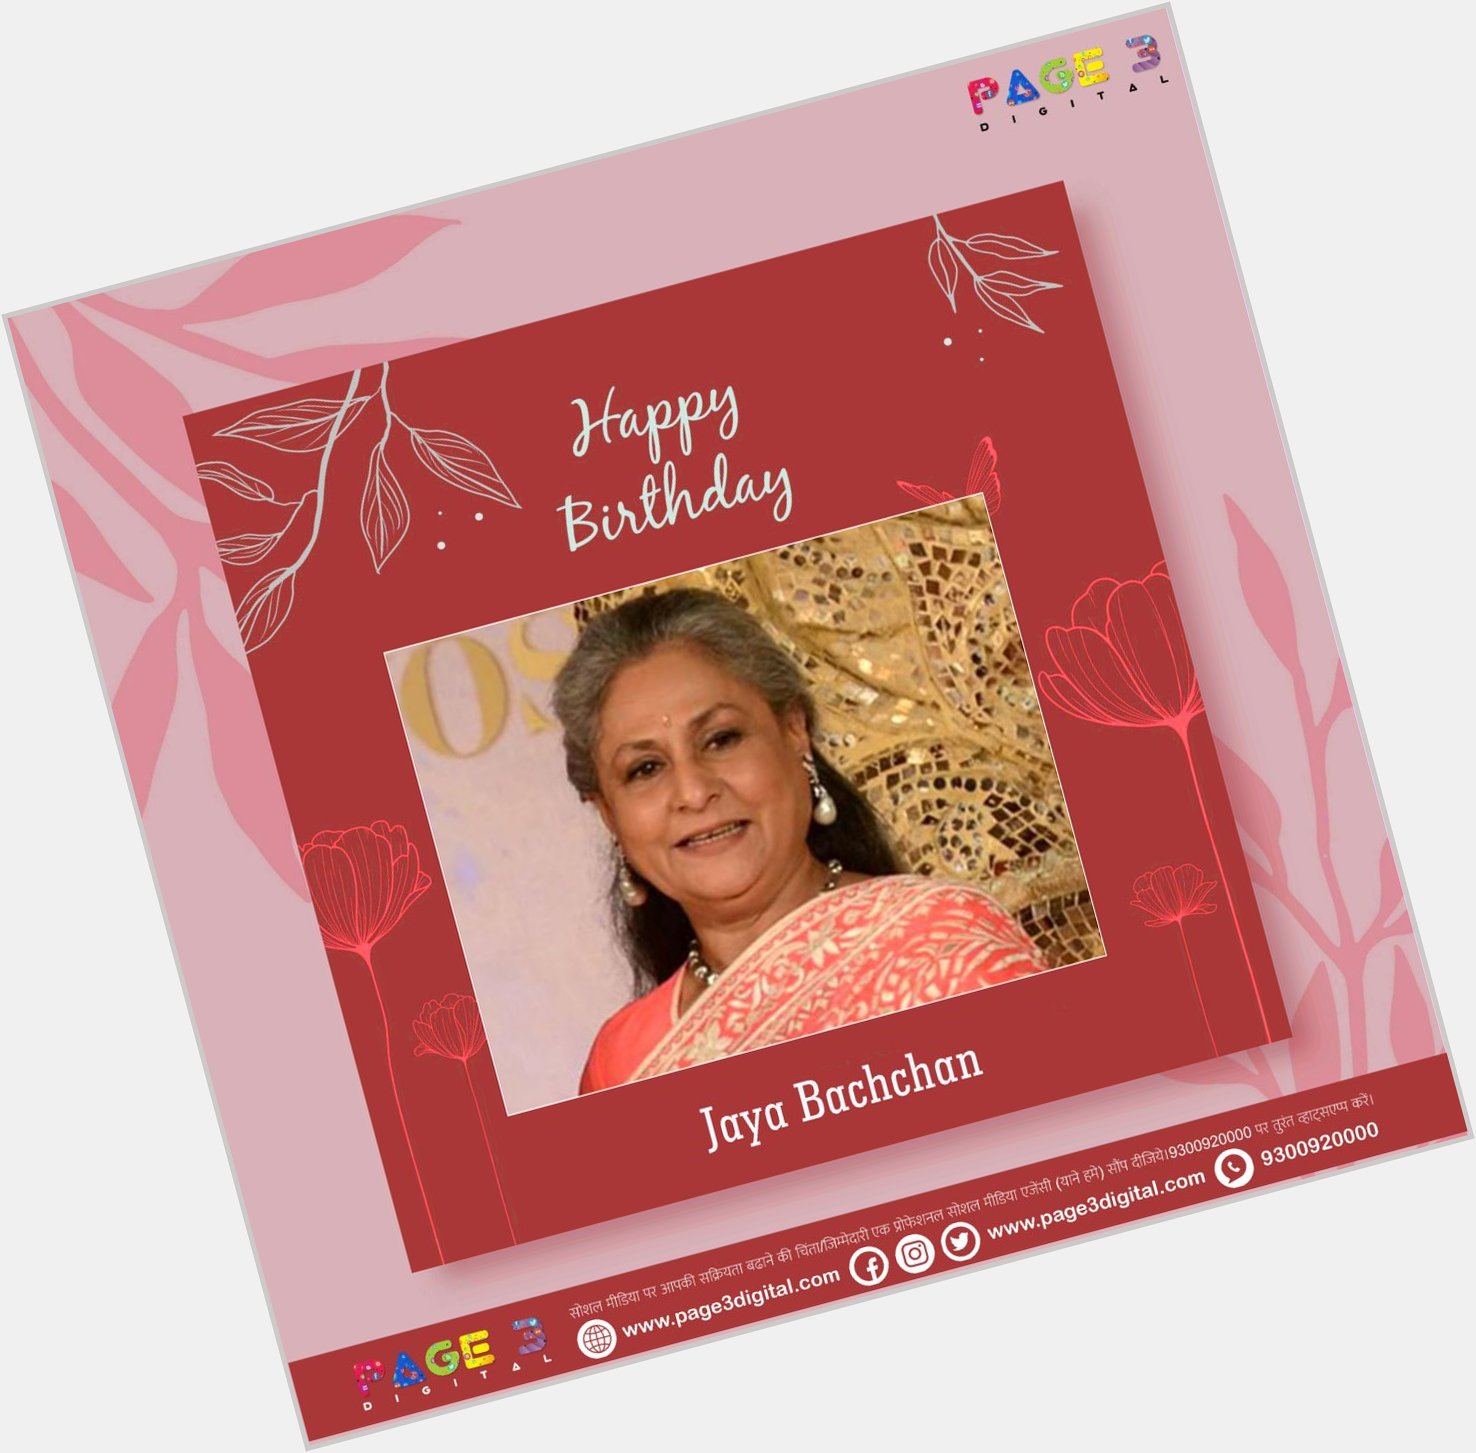 Happy Birthday to this talented actress Jaya Bachchan   